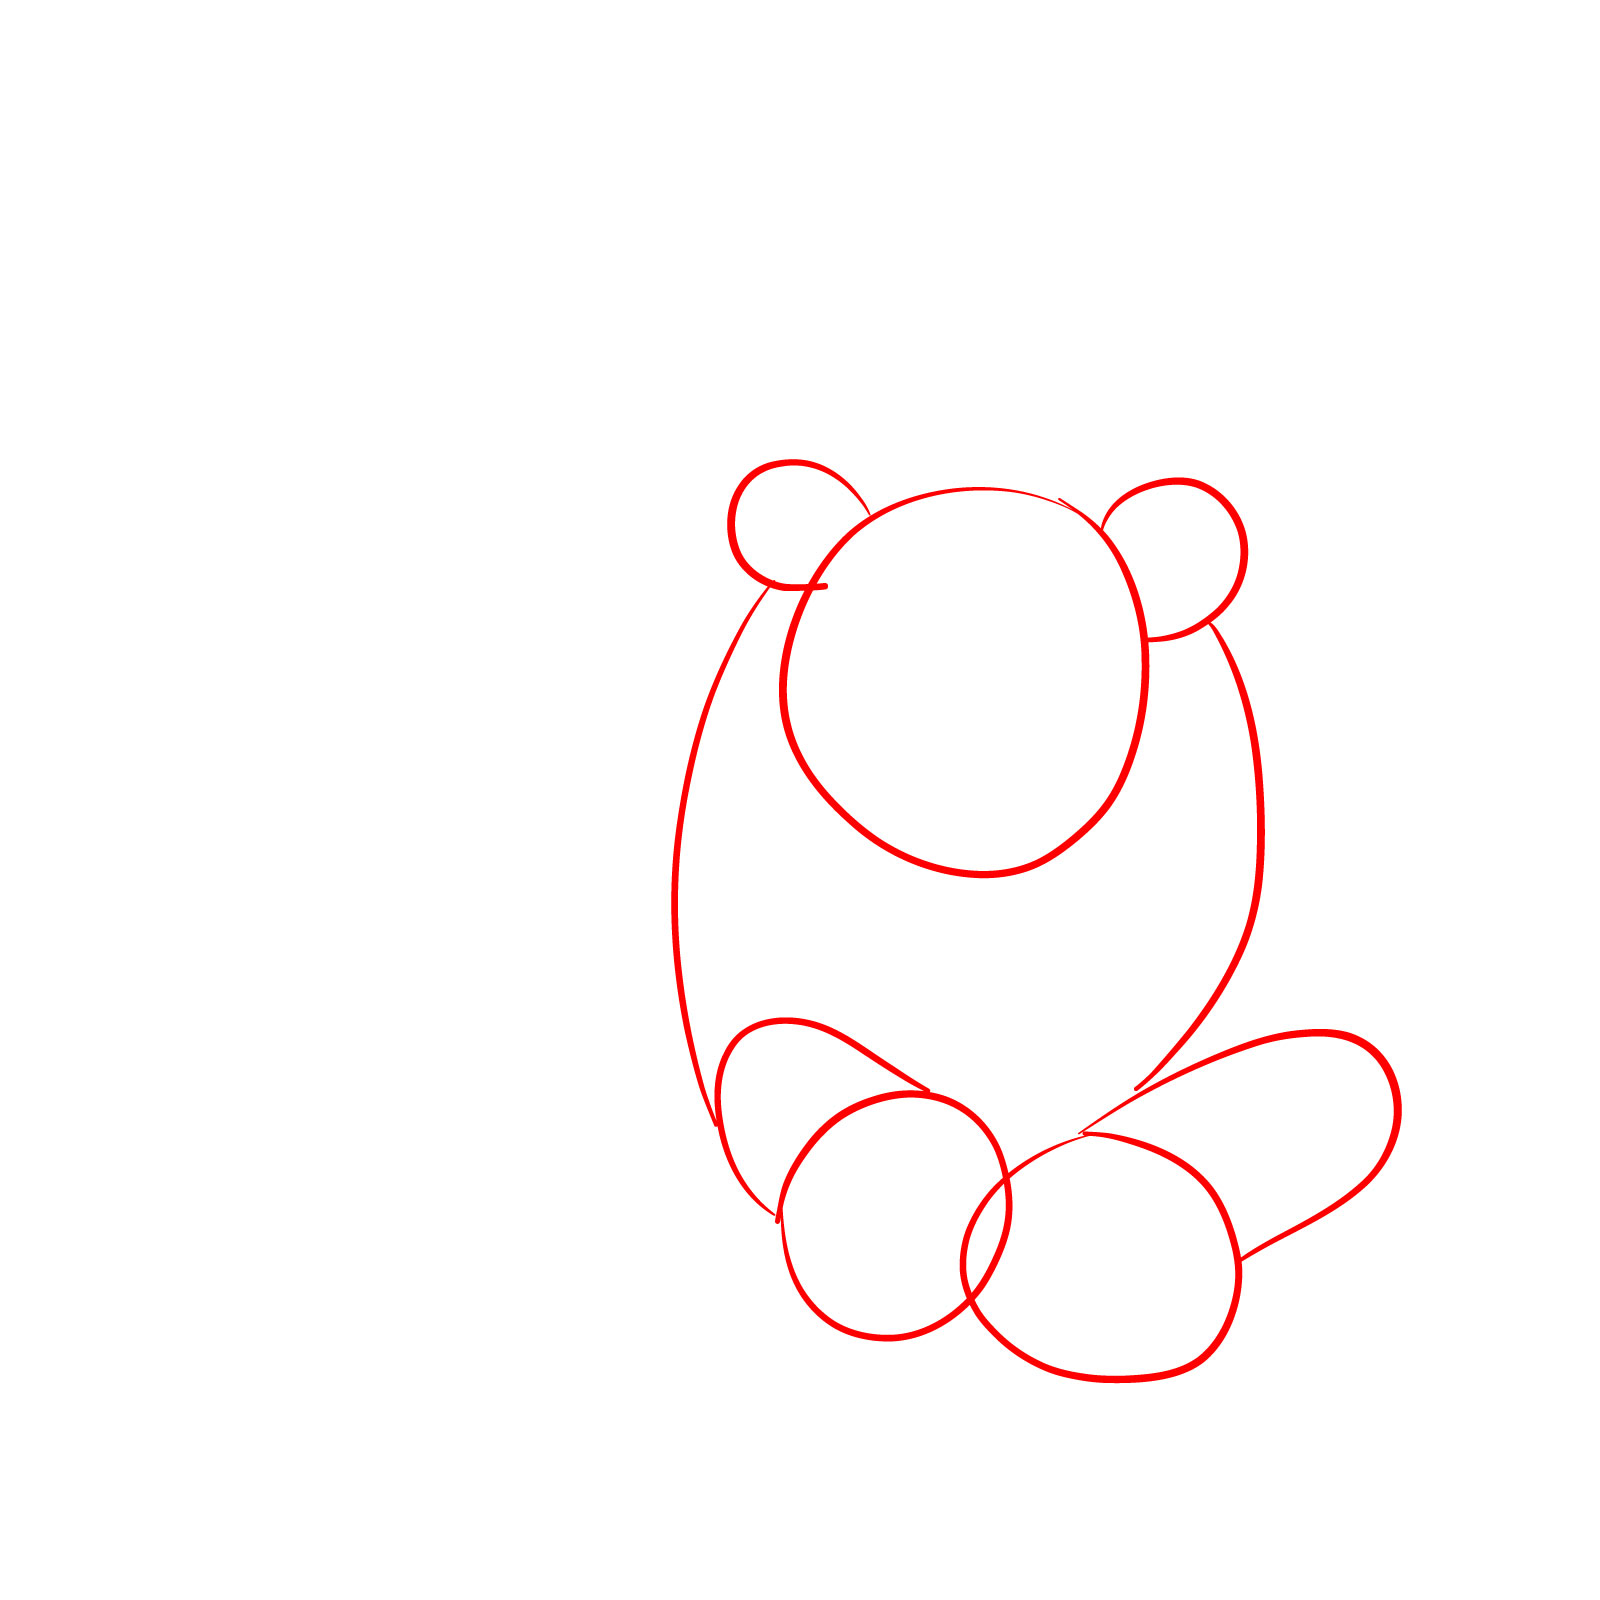 How to draw a sleeping lion in front view - Step 1: Basic shapes for the head, ears, and body